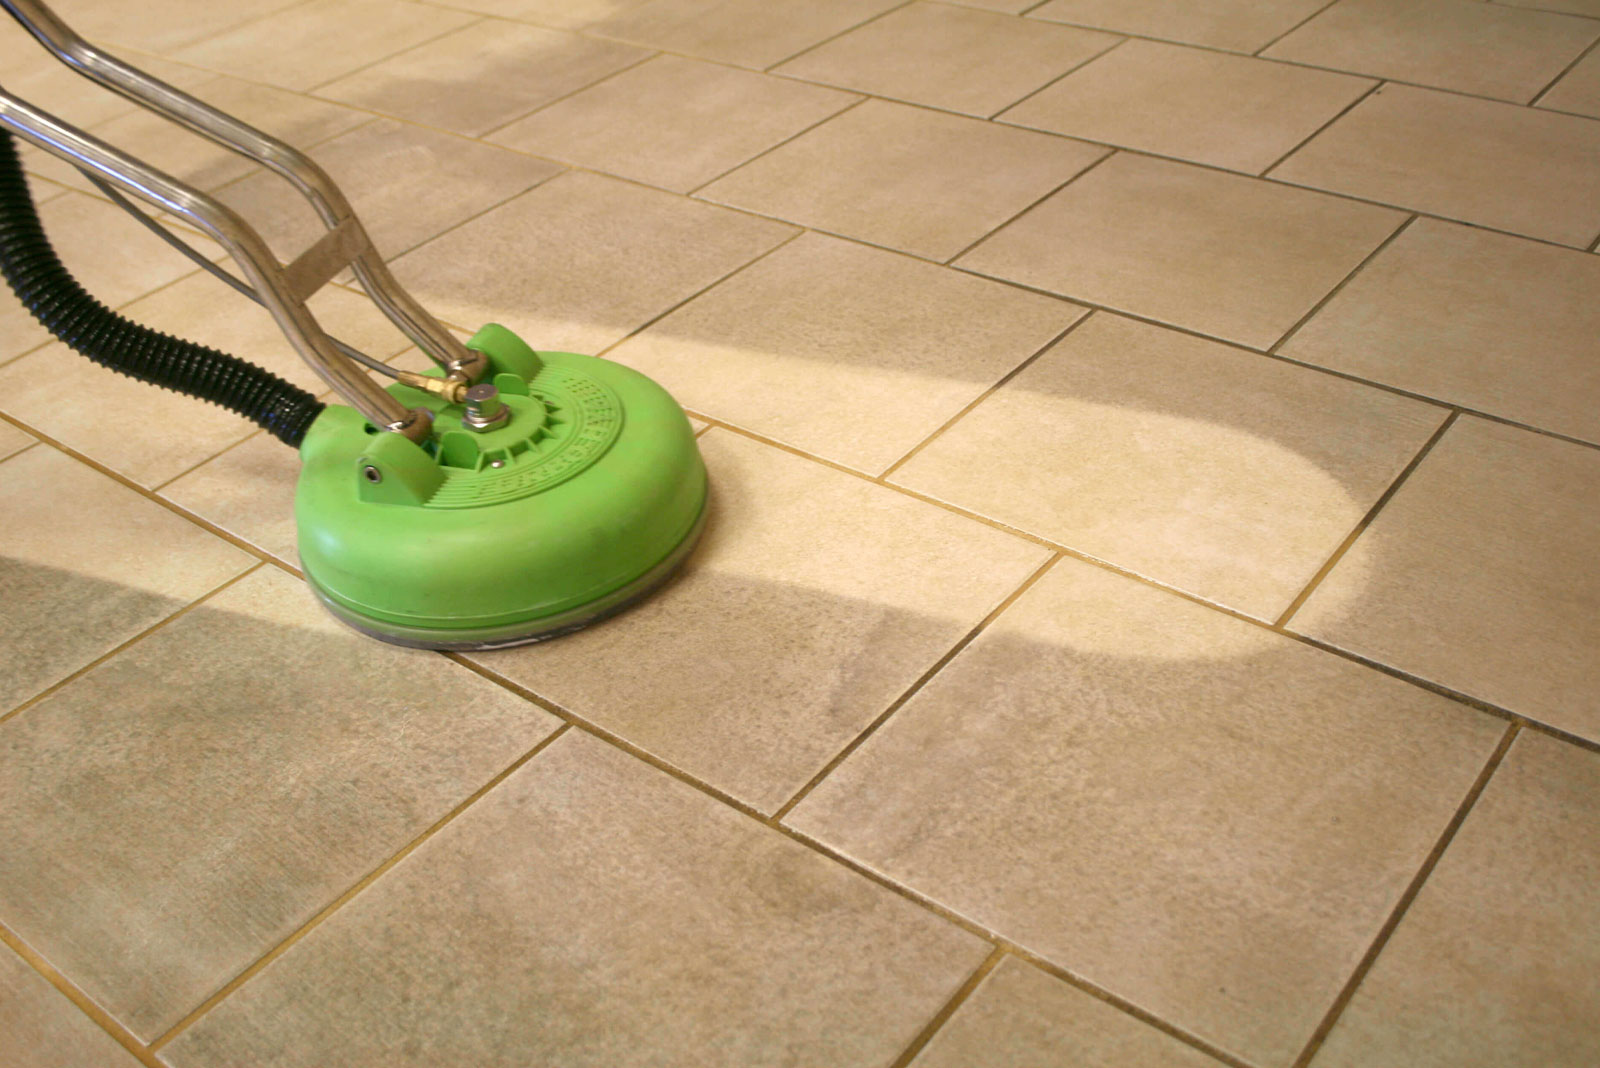 https://atlasjanitorialservices.com/wp-content/uploads/2021/12/tile-and-grout-cleaning-services.jpg